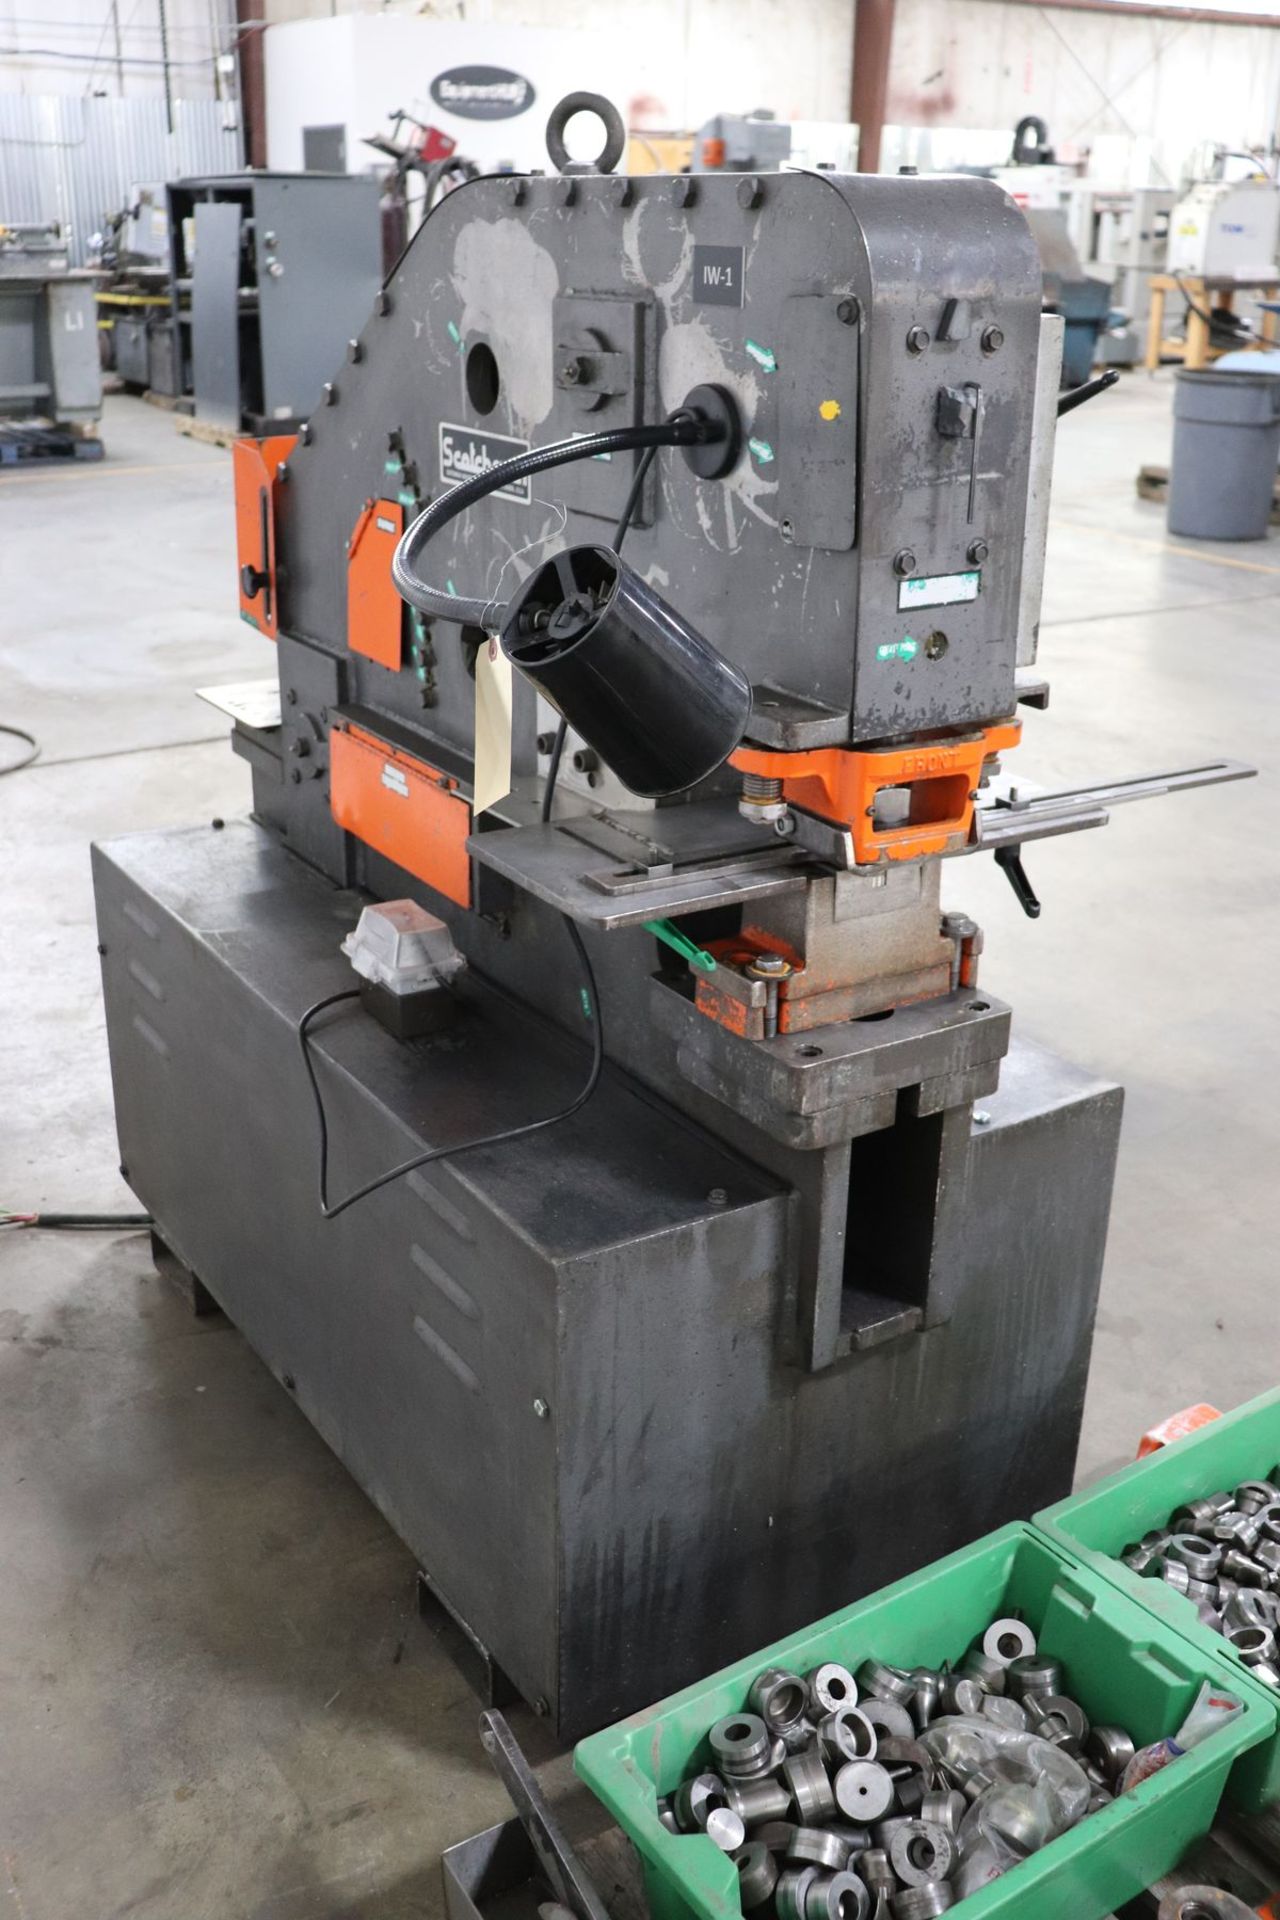 Scotchman FI-51 F1-5109-14M 51 Ton Hydraulic Ironworker, Lots of Tooling / Attachments - Image 12 of 13